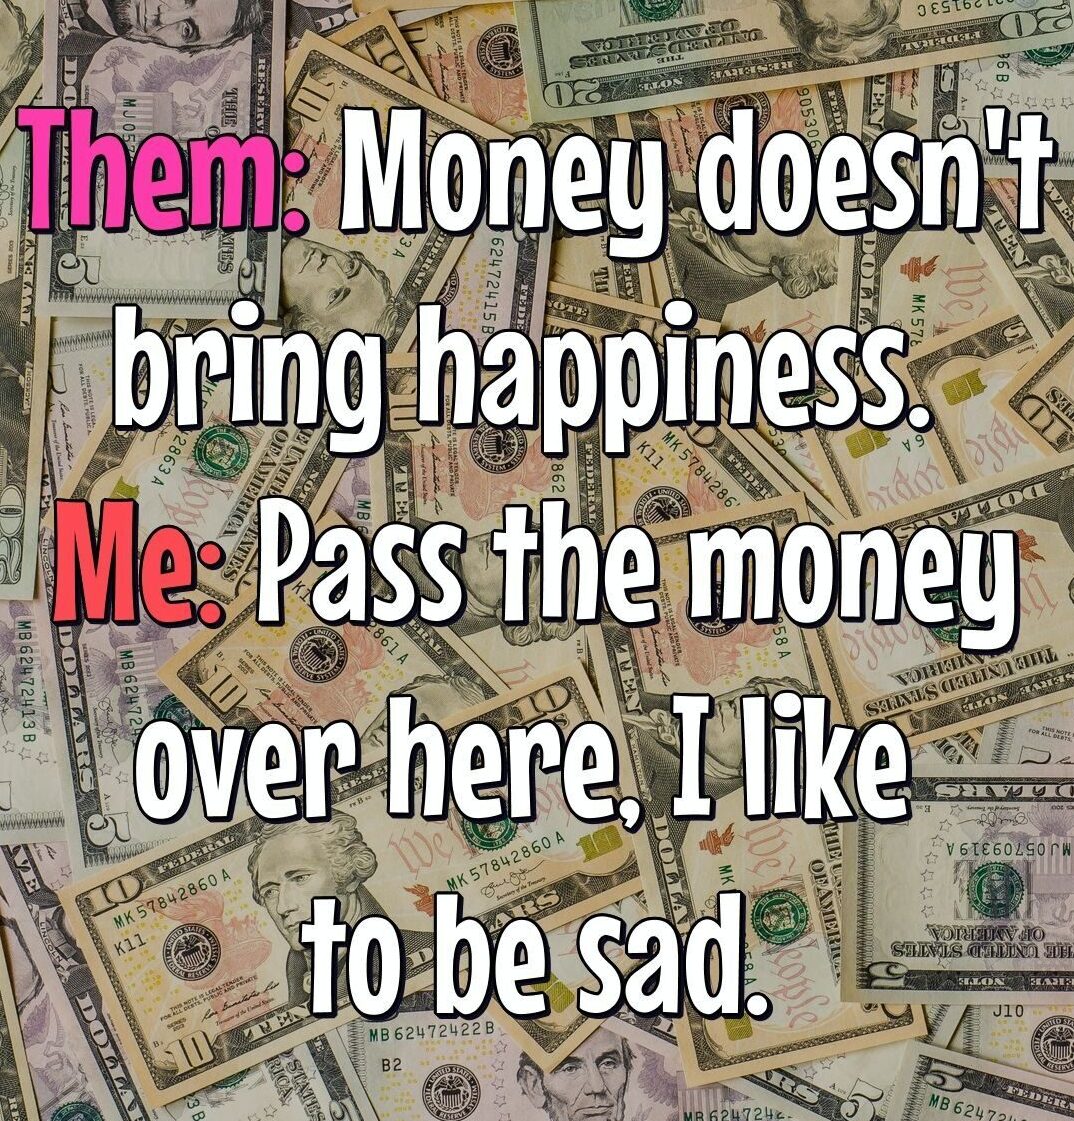 Them: Money doesn't bring happiness. - coolfunnyquotes.com